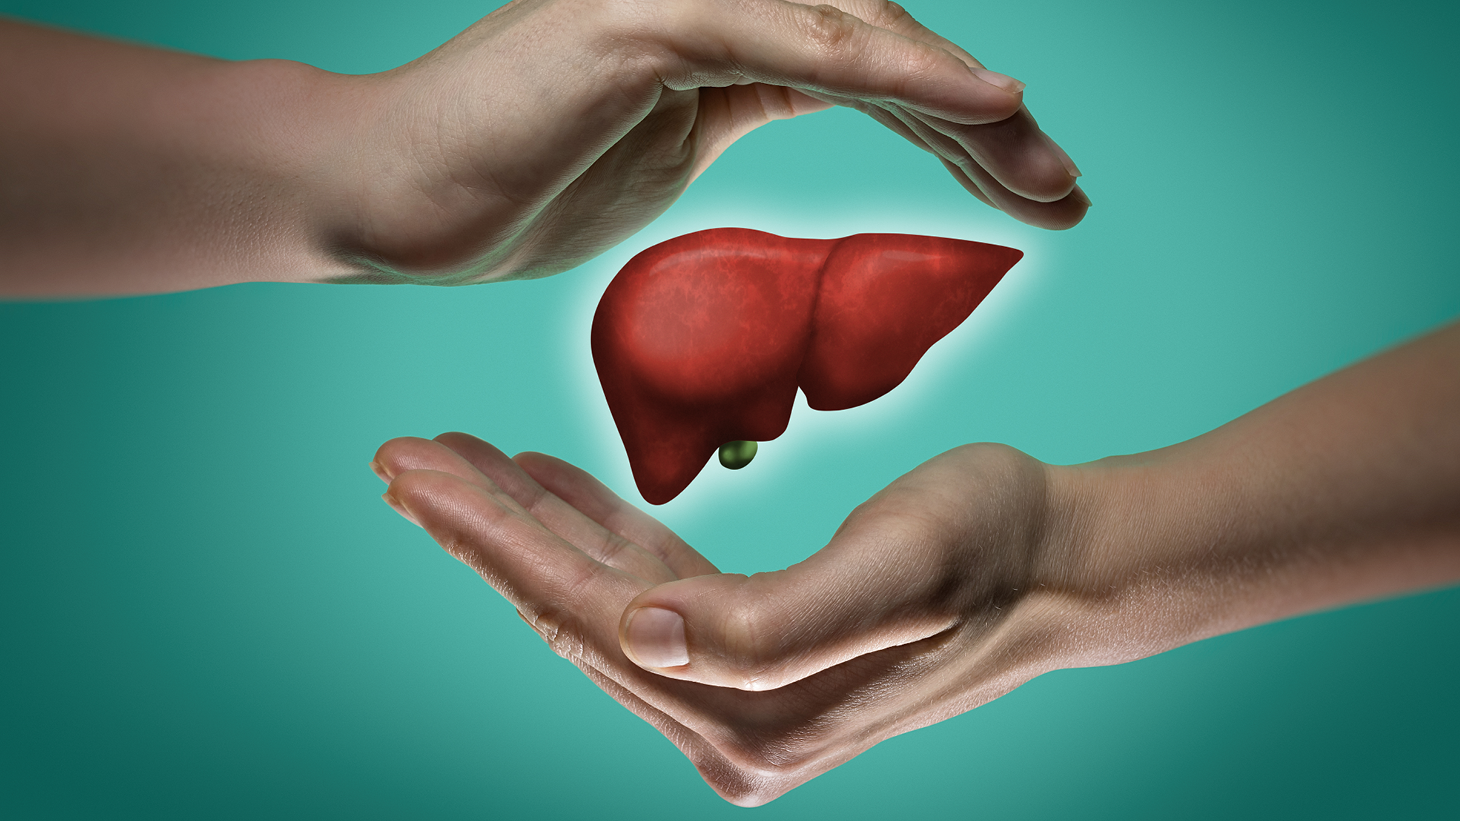 How is Your Liver & Gallbladder?